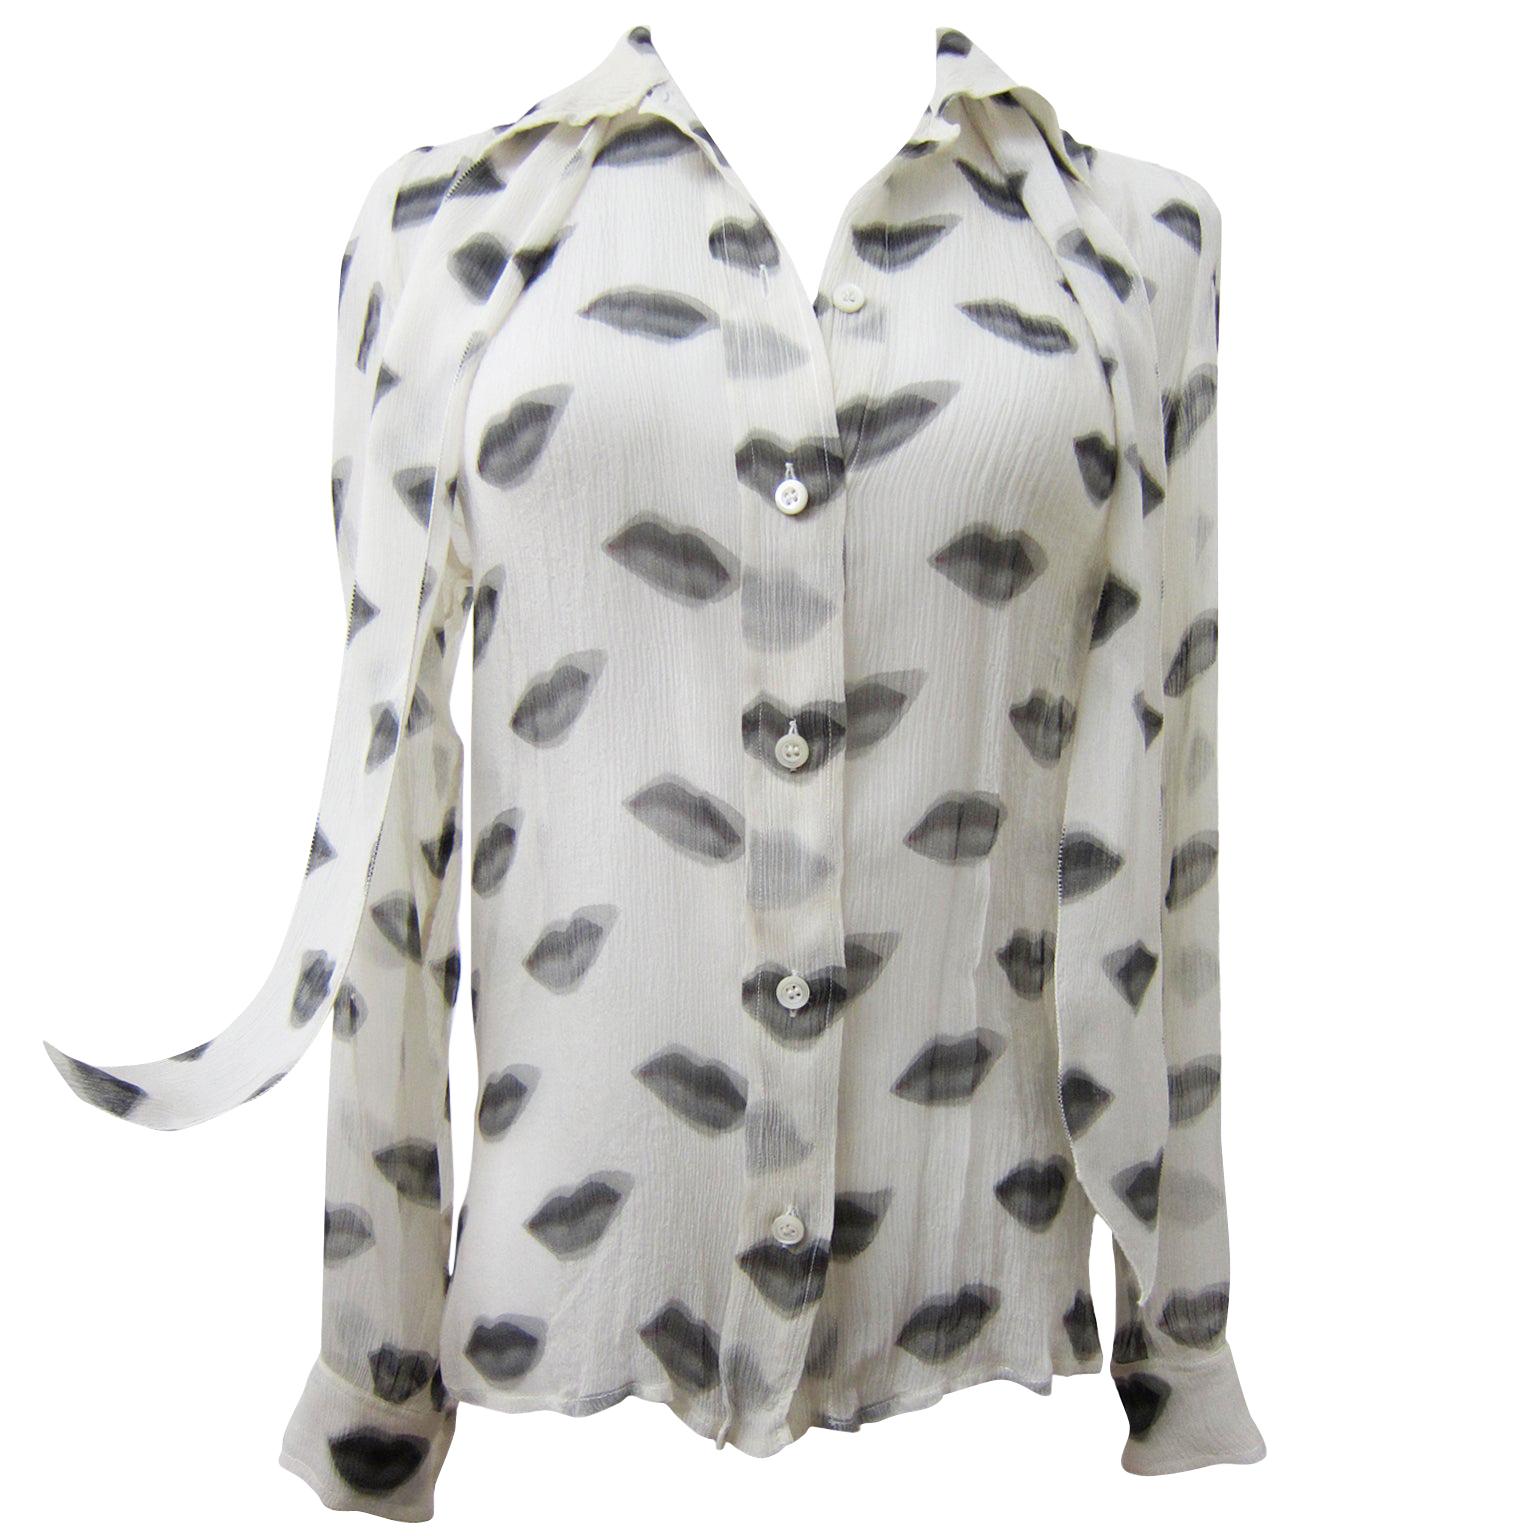 Prada Iconic Lip Print Silk Blouse Top With Bow SS 2000 For Sale